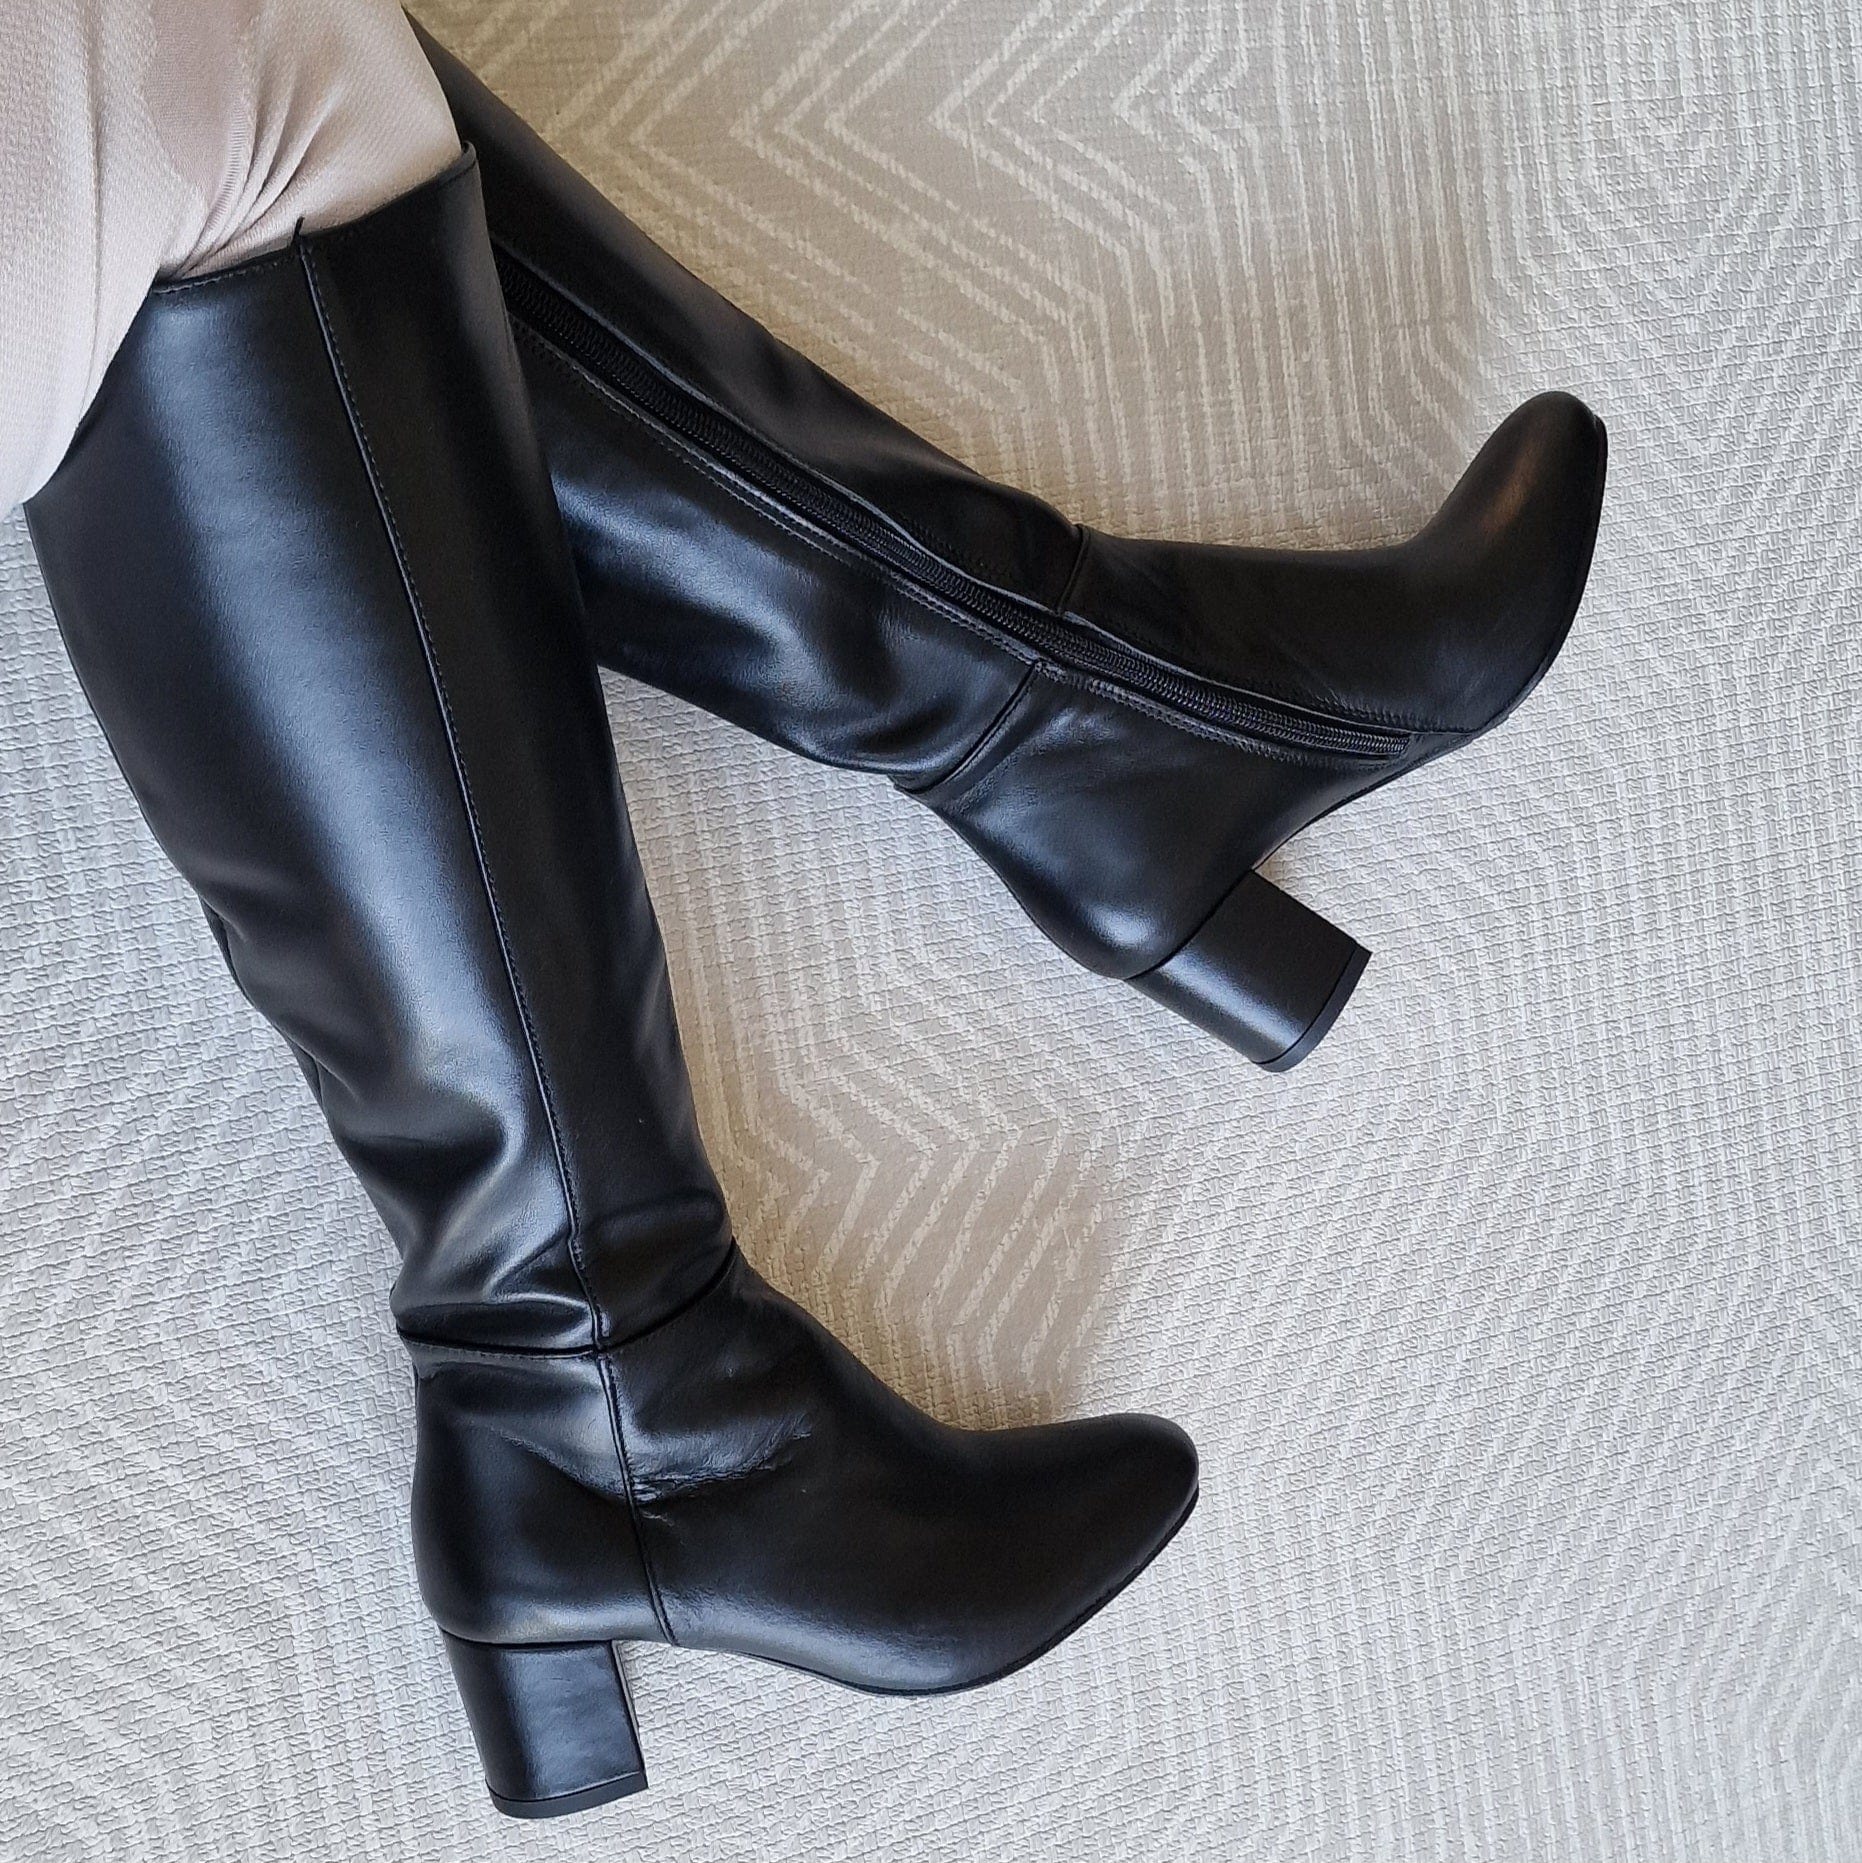 Small size knee high boots set on a mid block heel